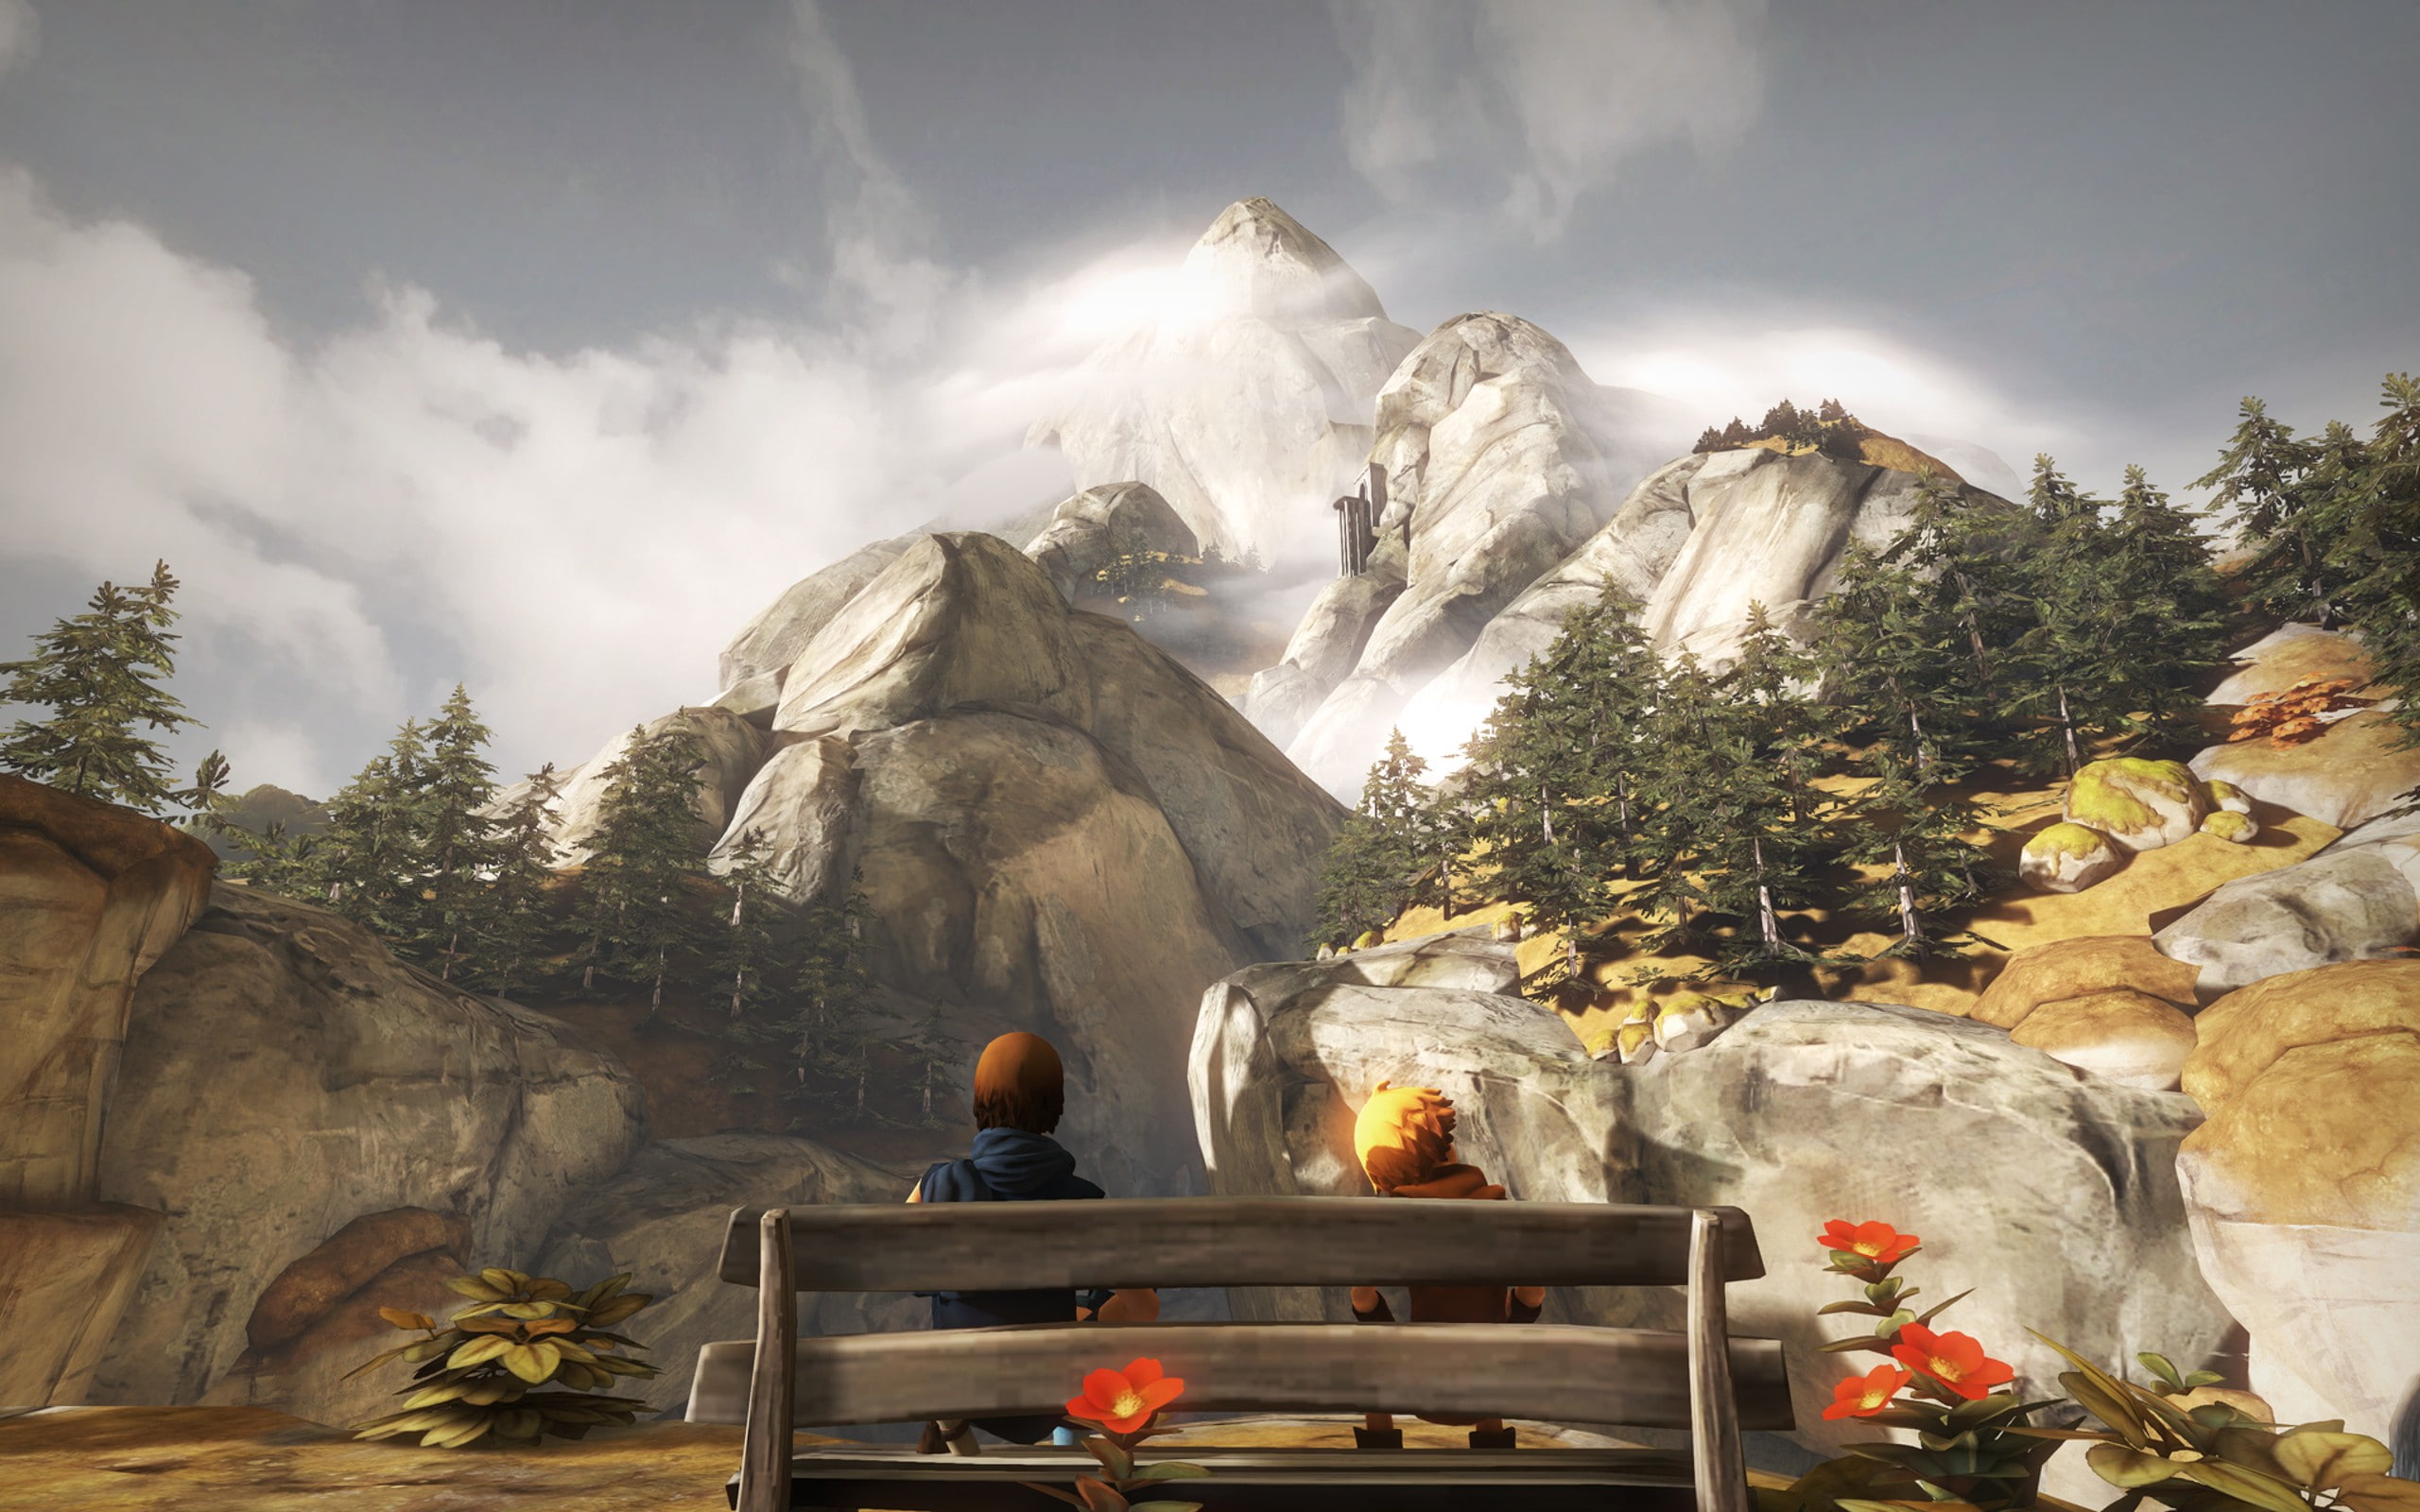 video games, Brothers: A Tale of Two Sons, plant, men, real people